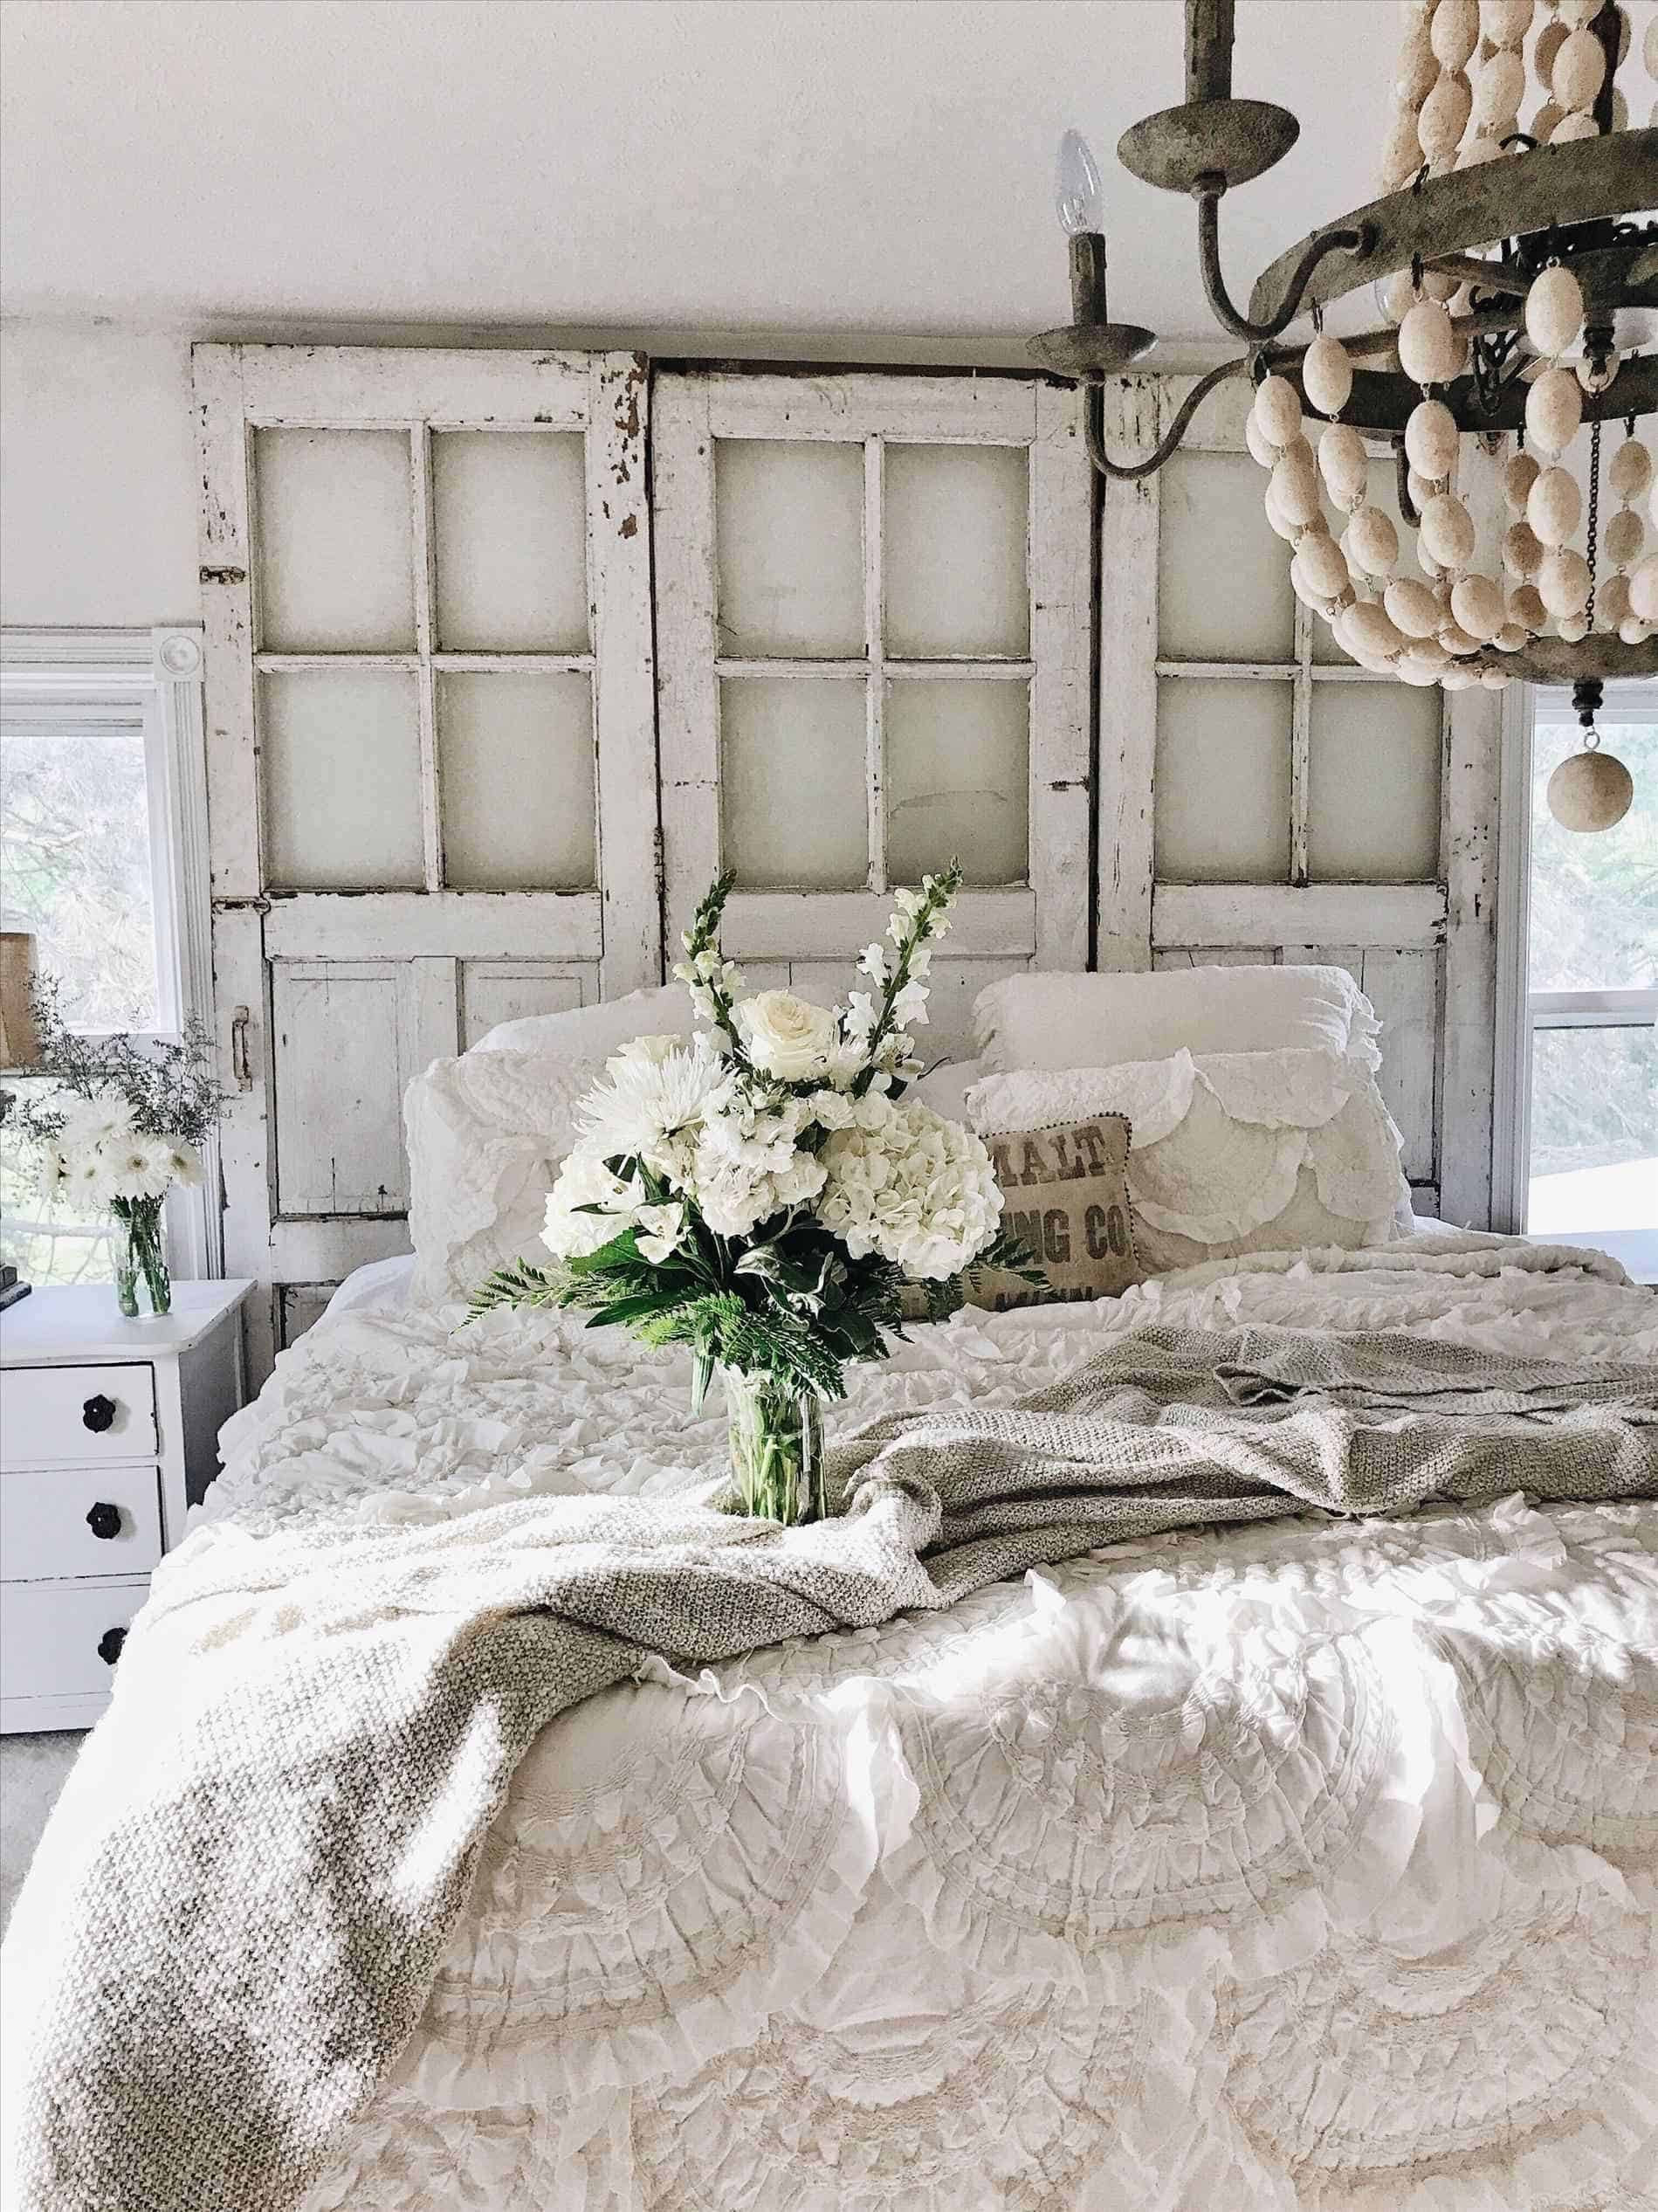 White Shabby Chic Bedroom Luxury Beautiful Shabby Chic Bedroom Ideas to Take In Consideration